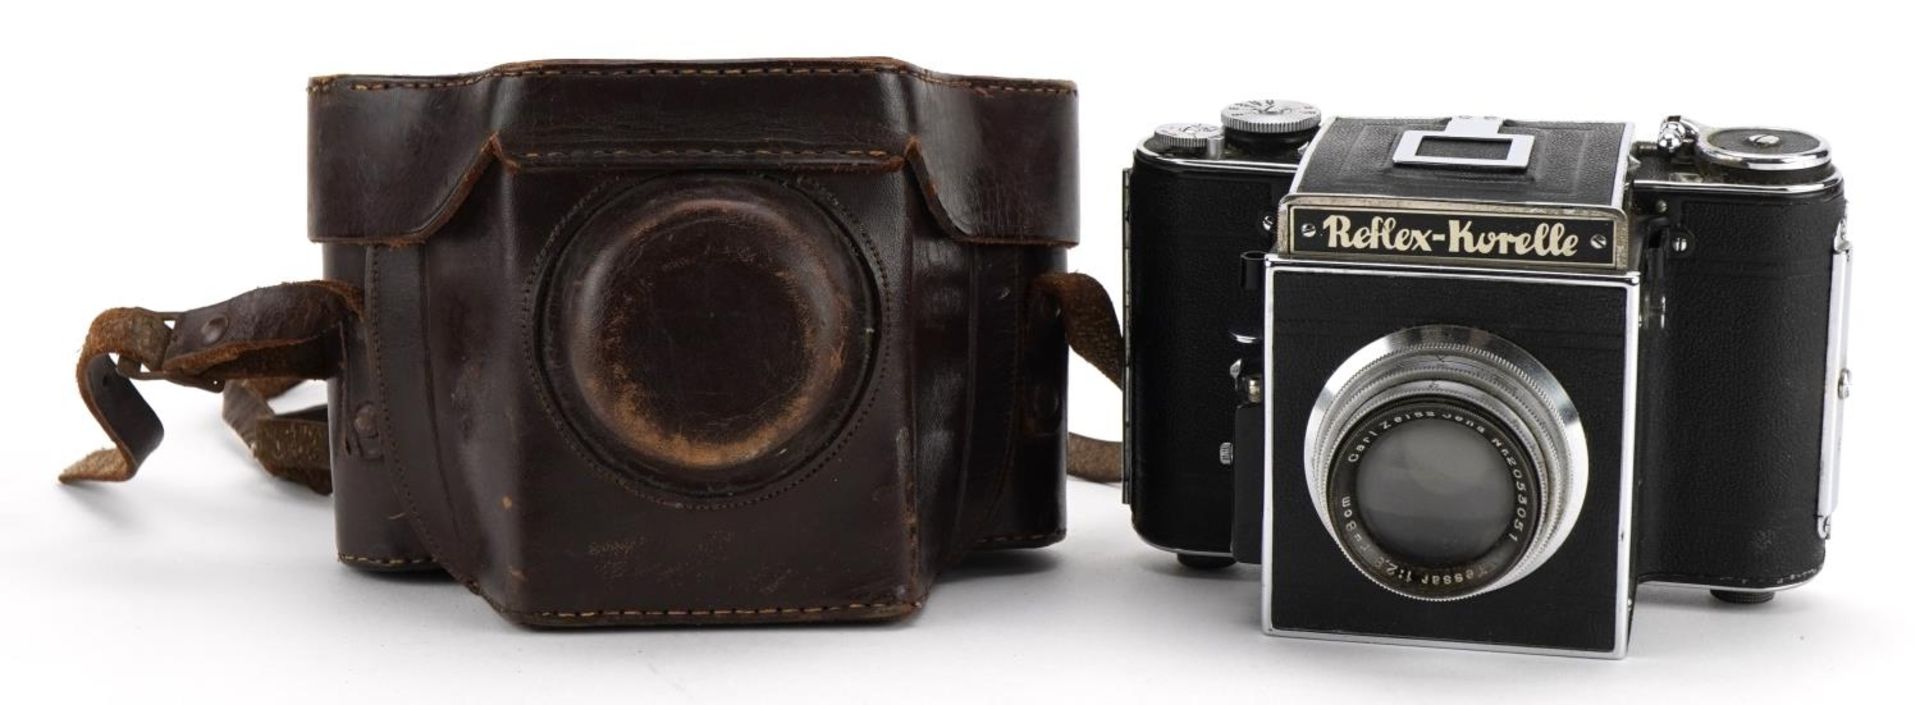 Vintage Reflex Korelle camera with Carl Zeiss Jena number 2053051 lens and leather case